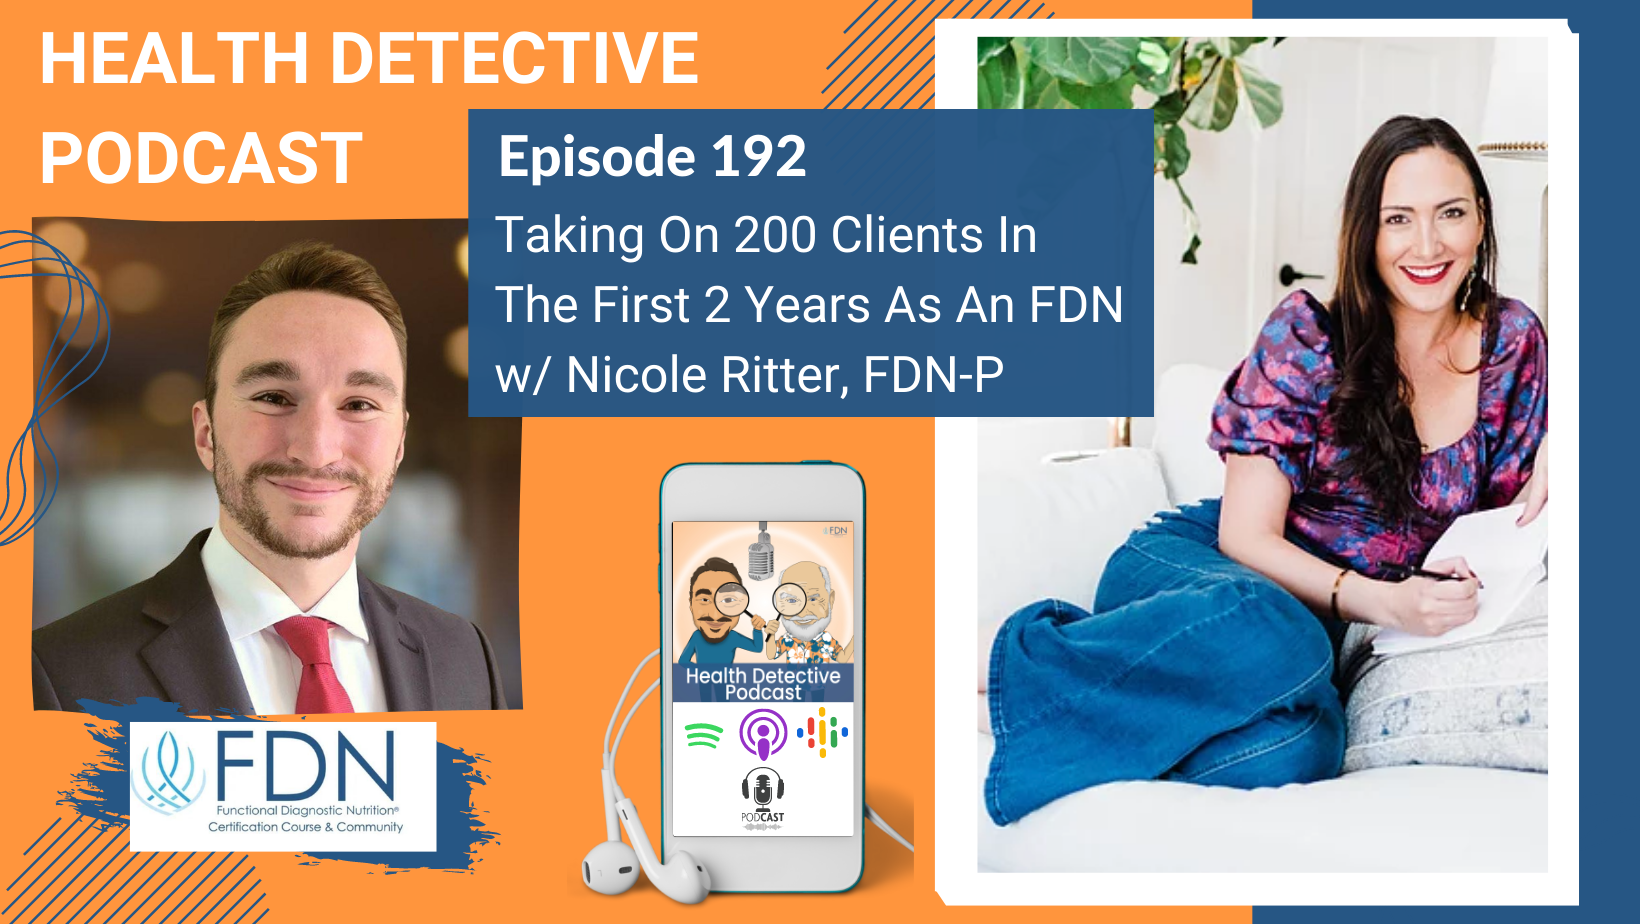 HORIZONTAL HEADSHOT, NICOLE RITTER, AN FDN, 200 CLIENTS IN FIRST 2 YEARS, FDN, FDNTRAINING, HEALTH DETECTIVE PODCAST